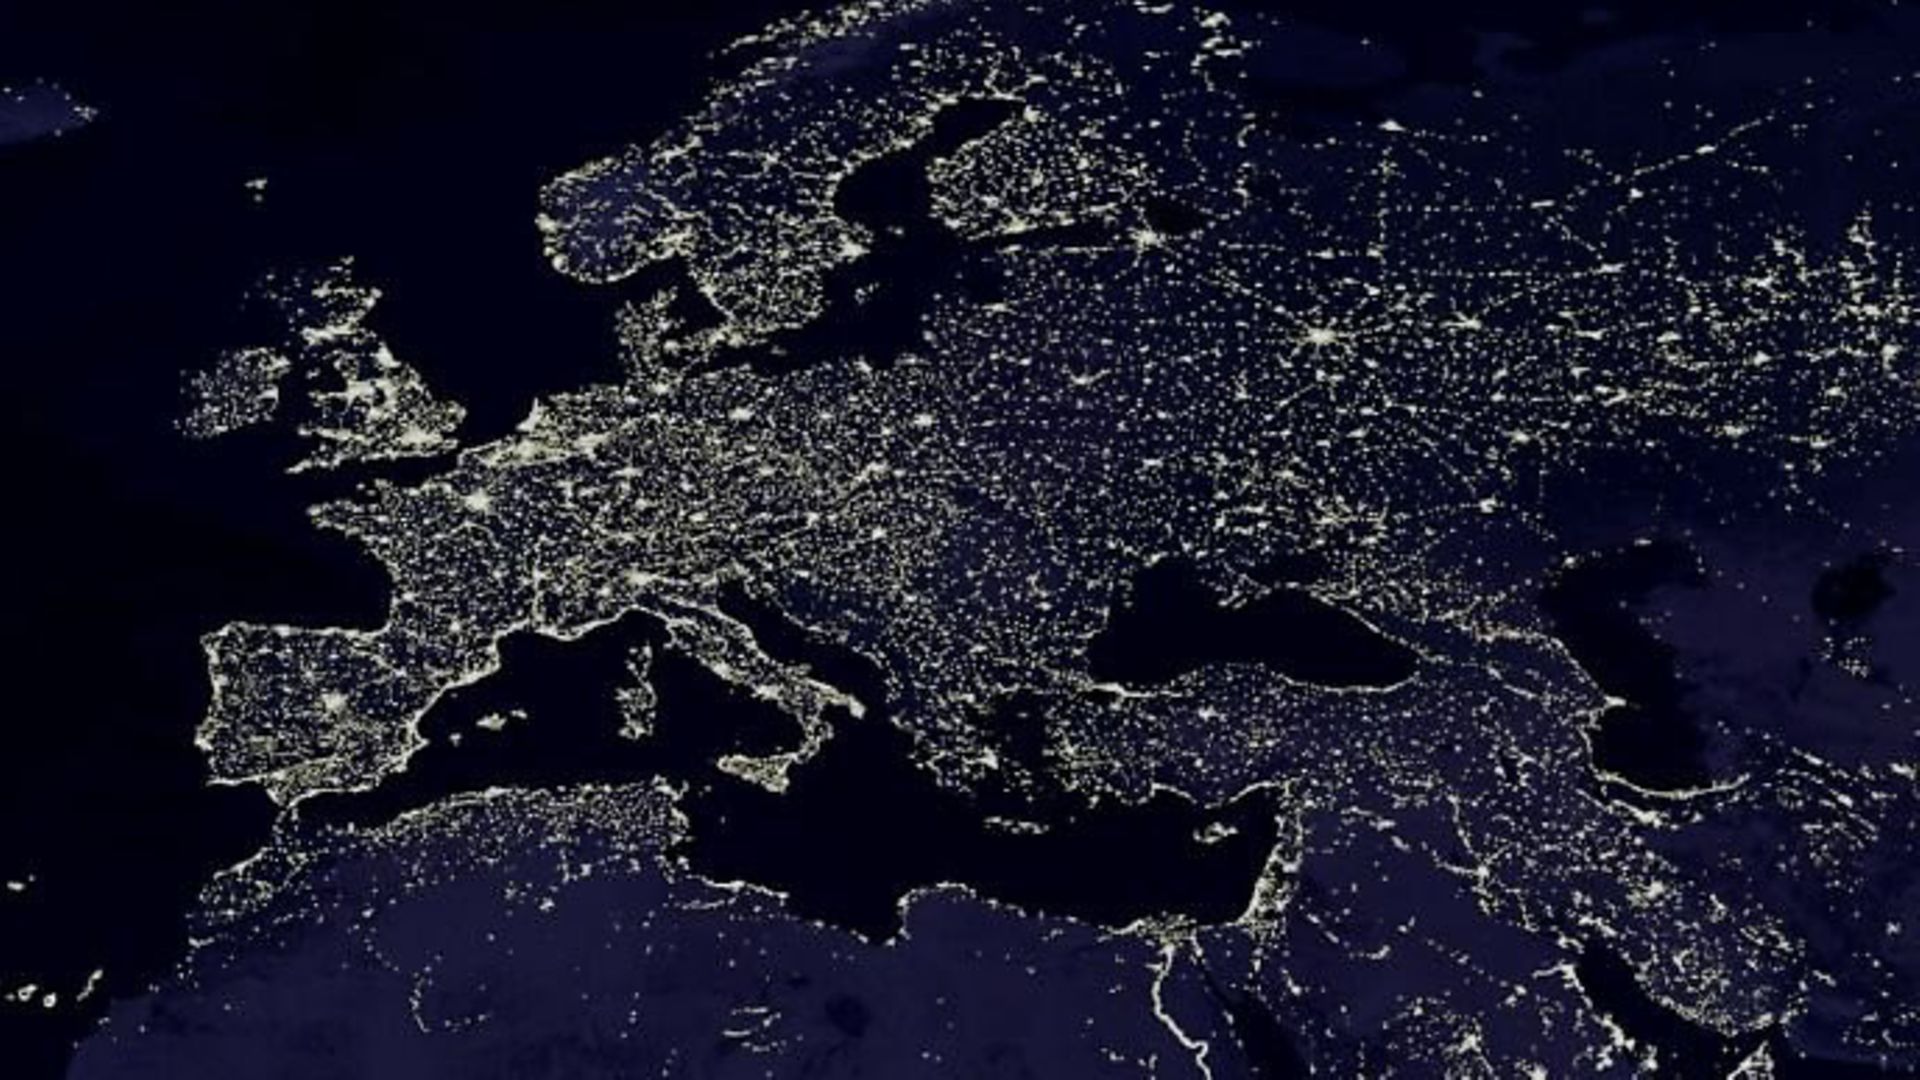 The night lights of Europe (as seen from space) - Credit: NASA/GSFC/Flickr.